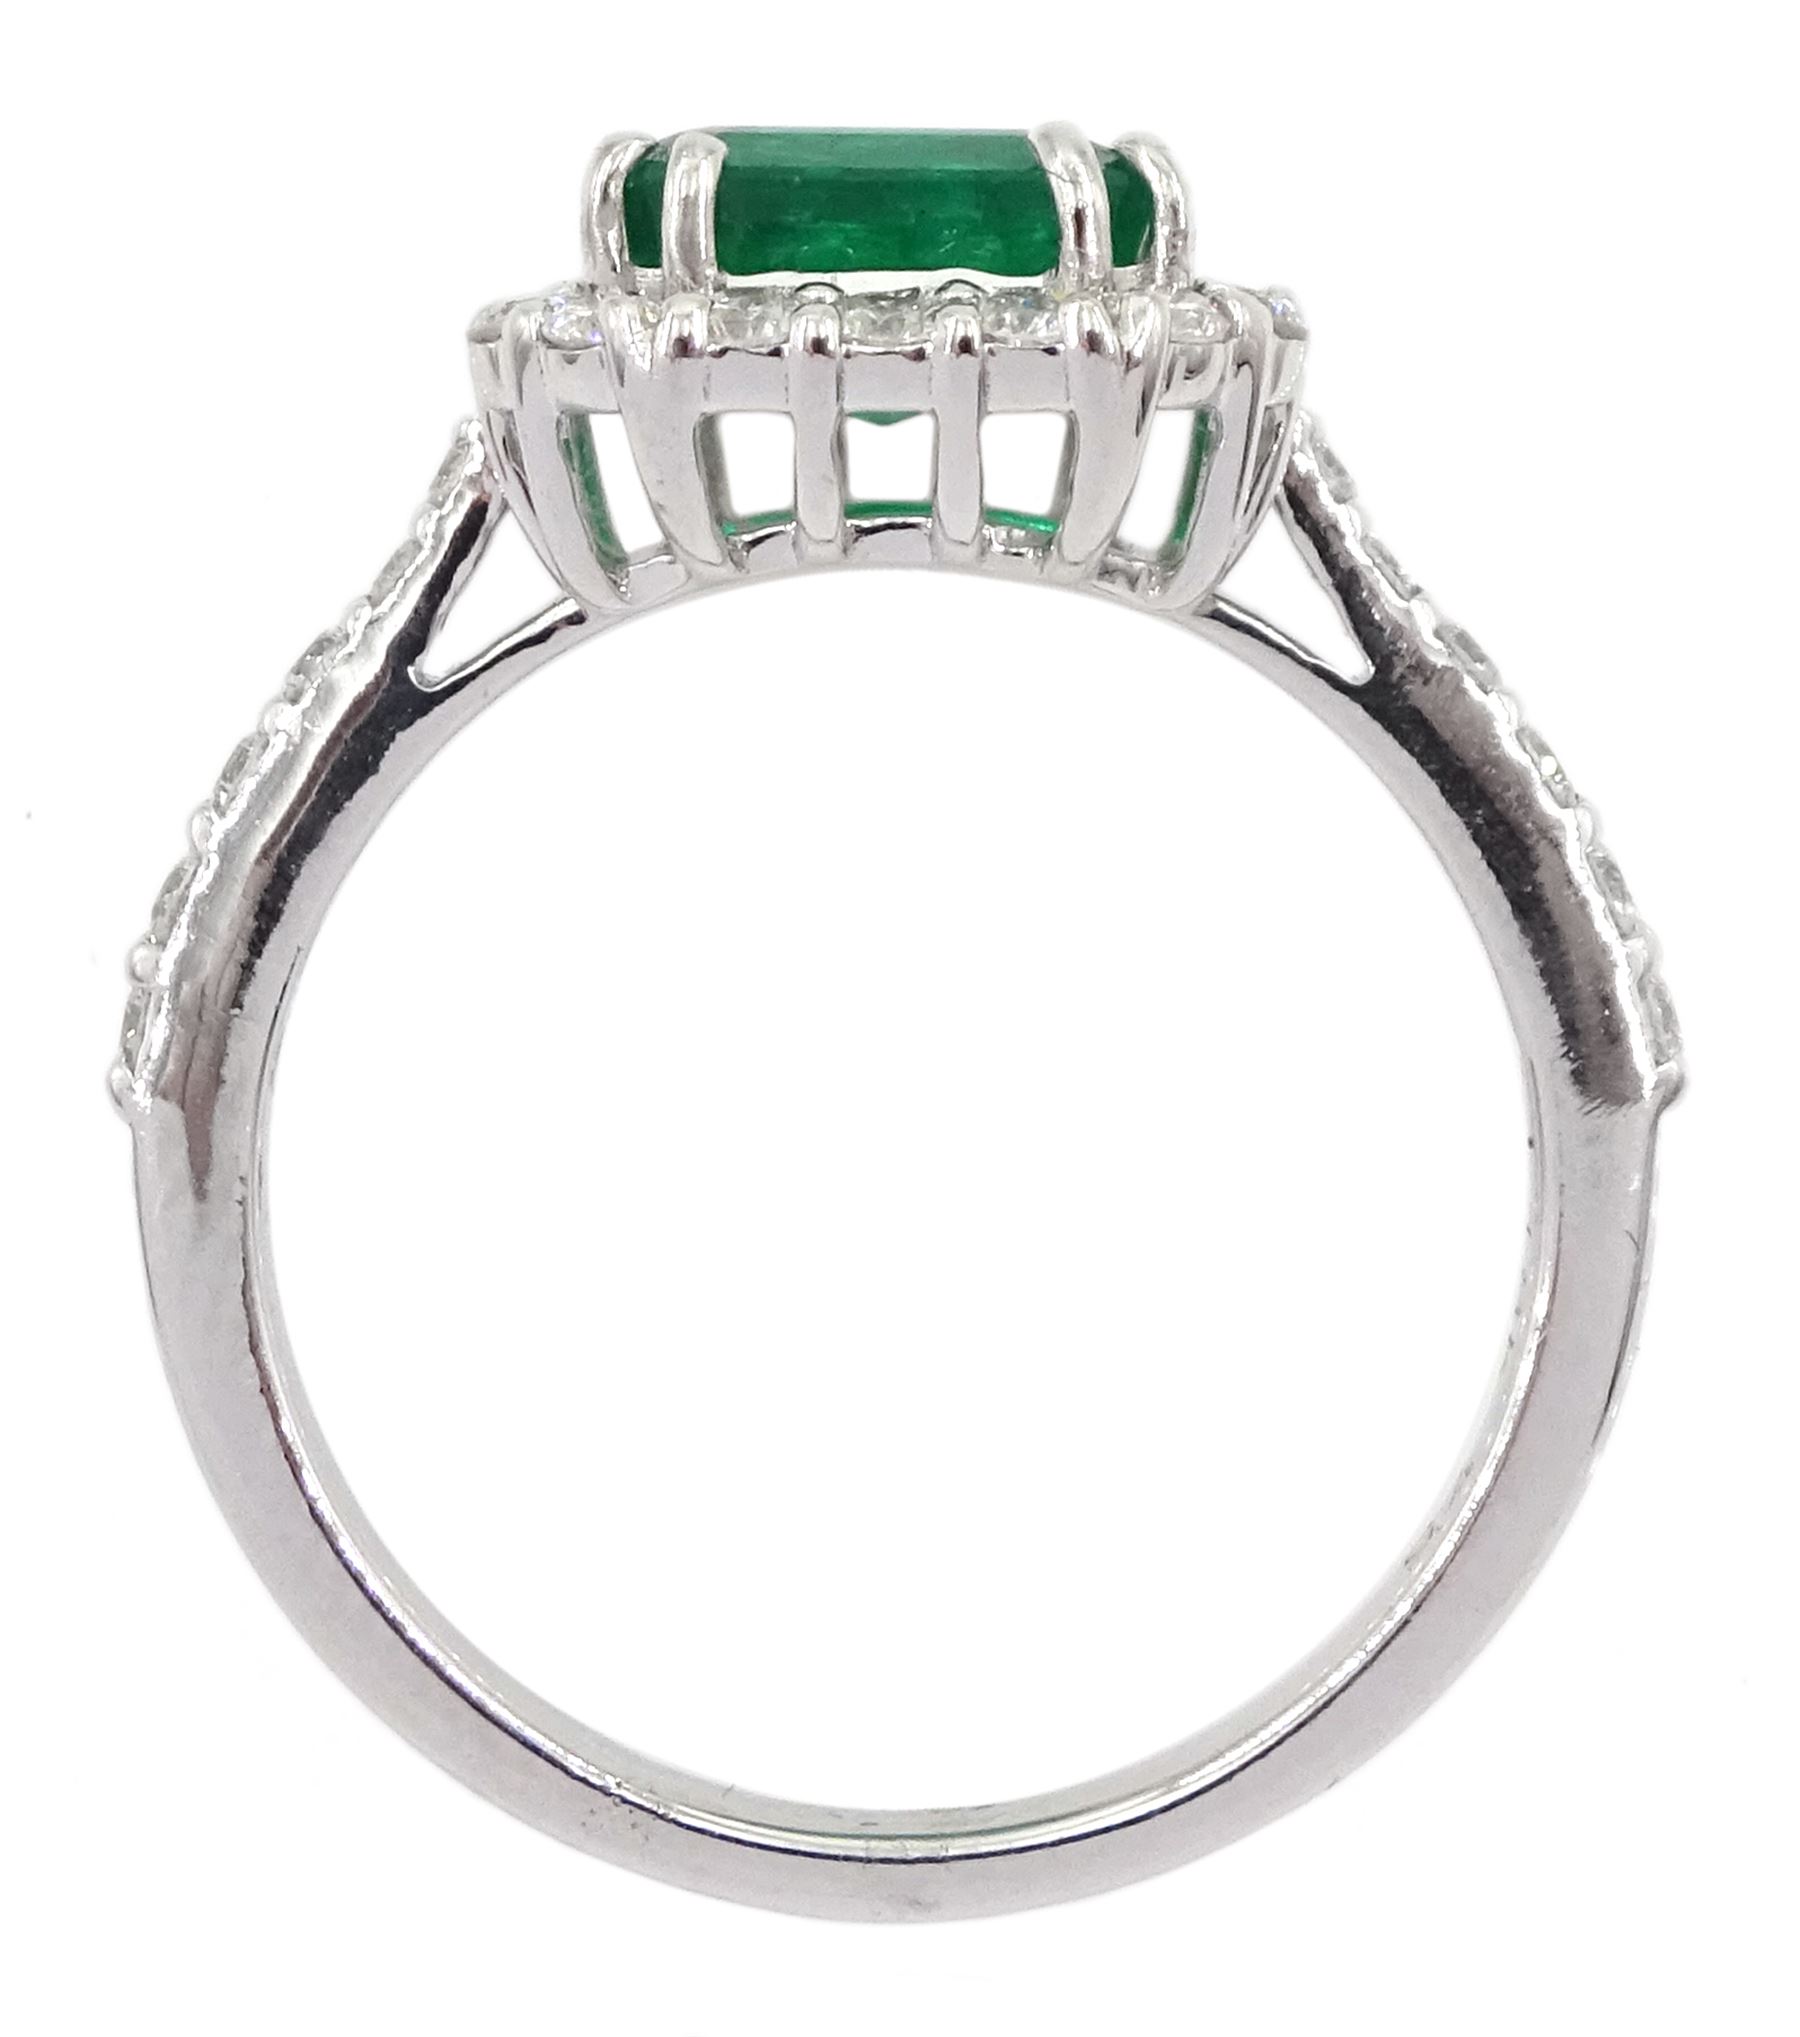 18ct white gold octagonal cut emerald and round brilliant cut diamond cluster ring - Image 4 of 4